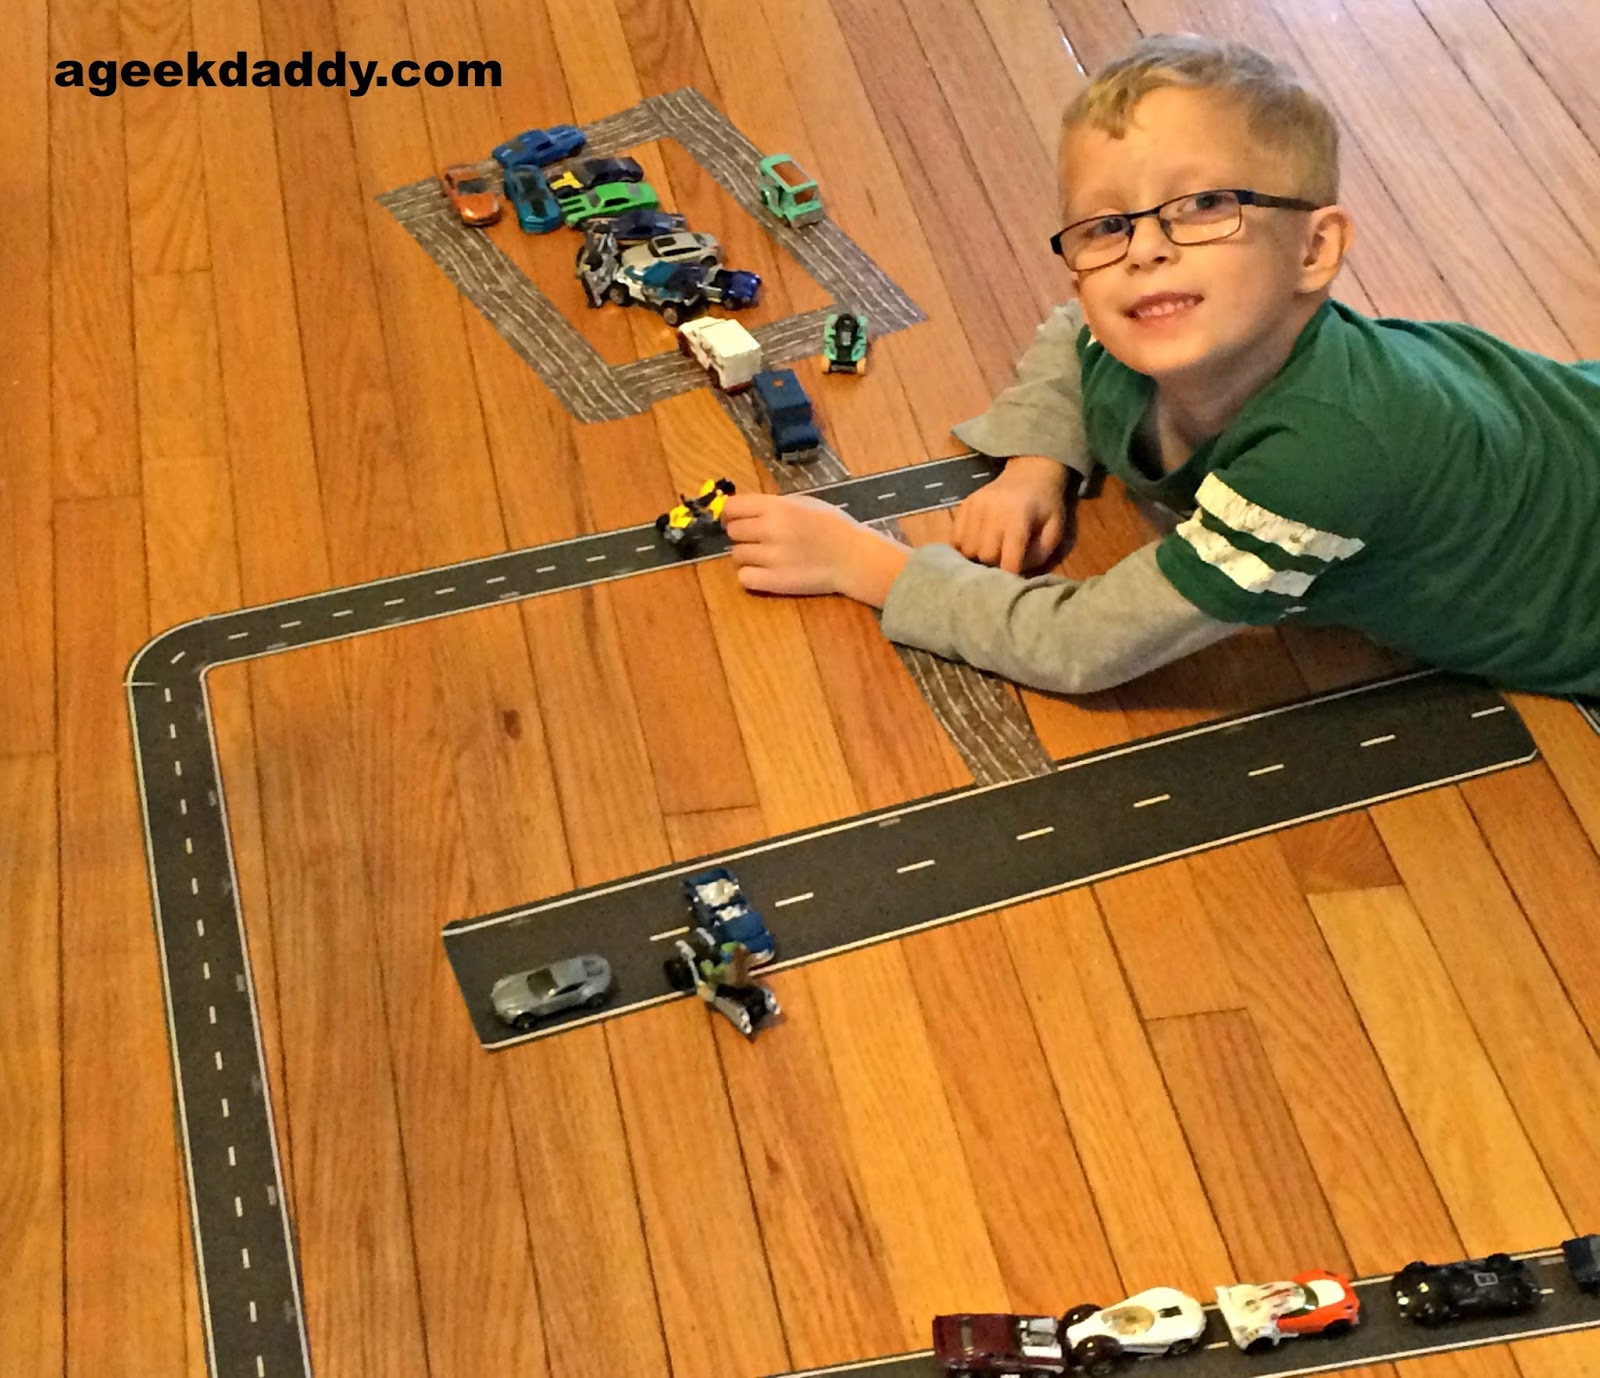 Review: InRoad Toys PlayTape - A Dad's Take on Road Tape